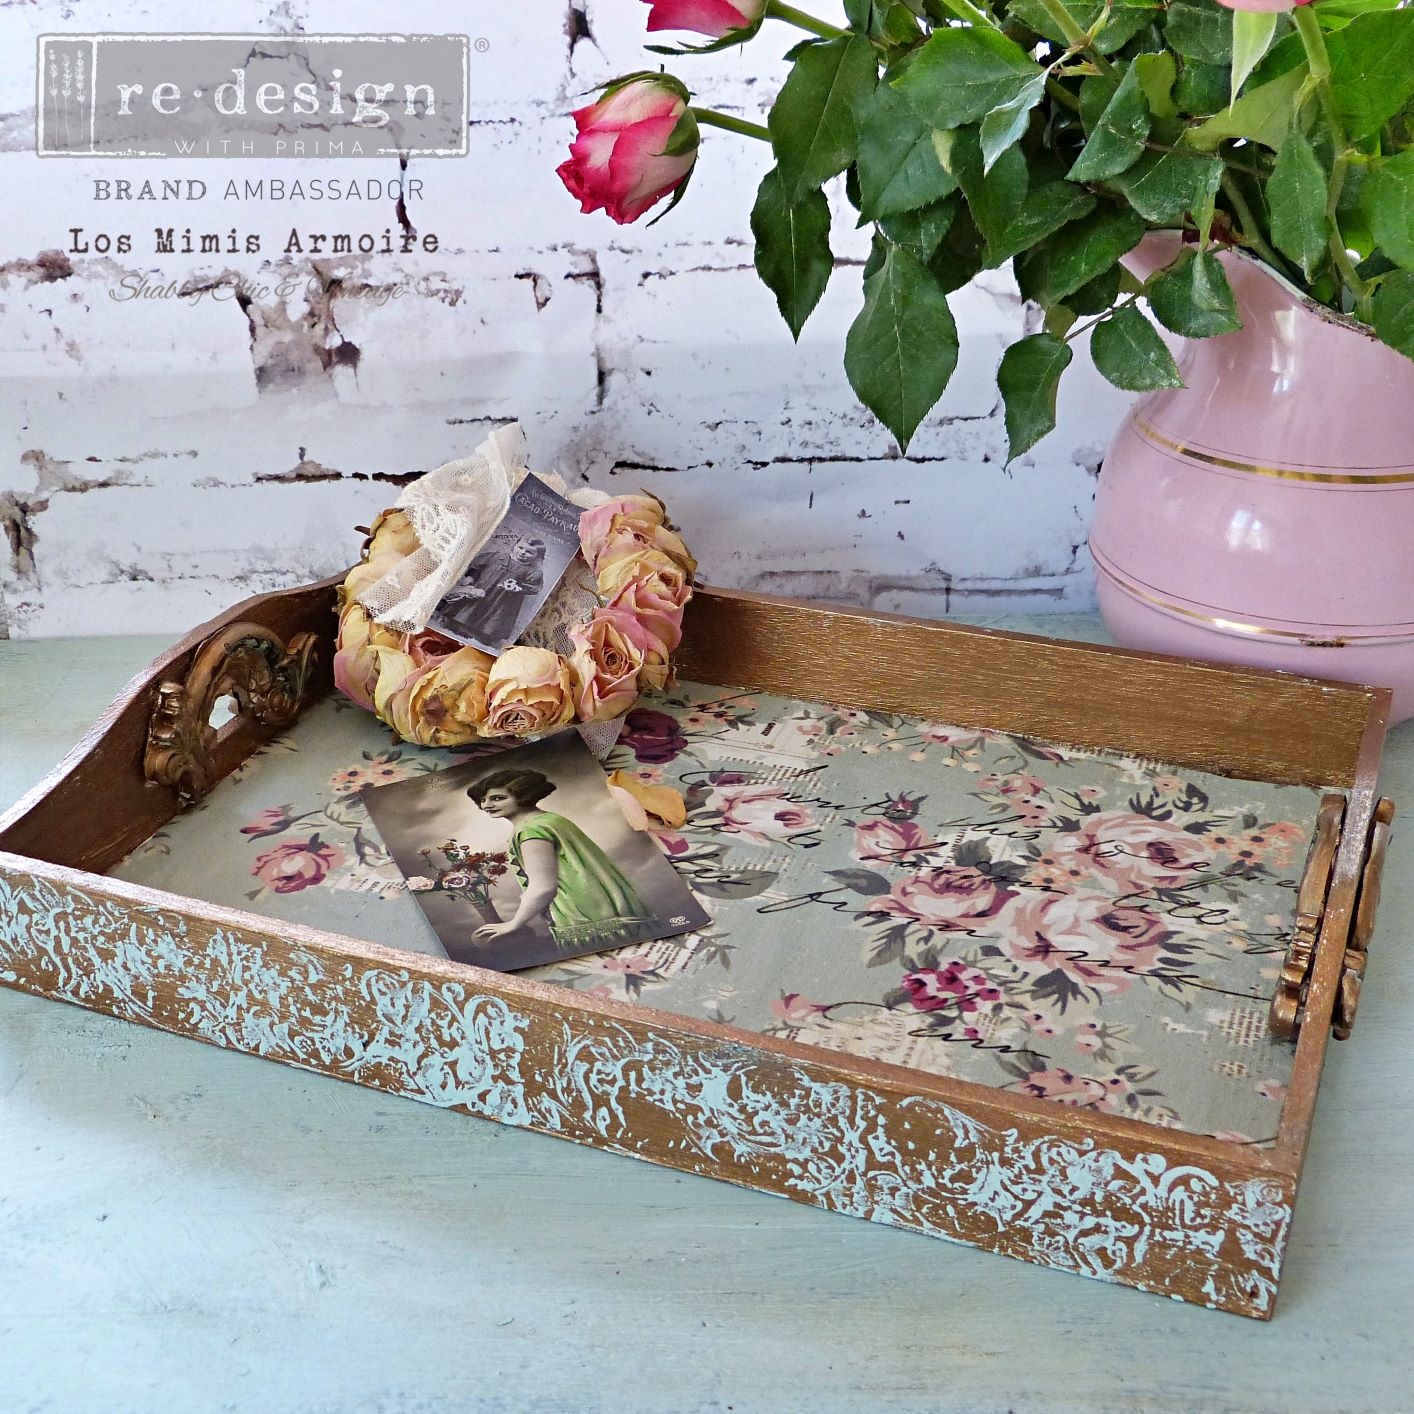 Redesign with Prima Redesign - Decoupage Tissue Paper - Olivia